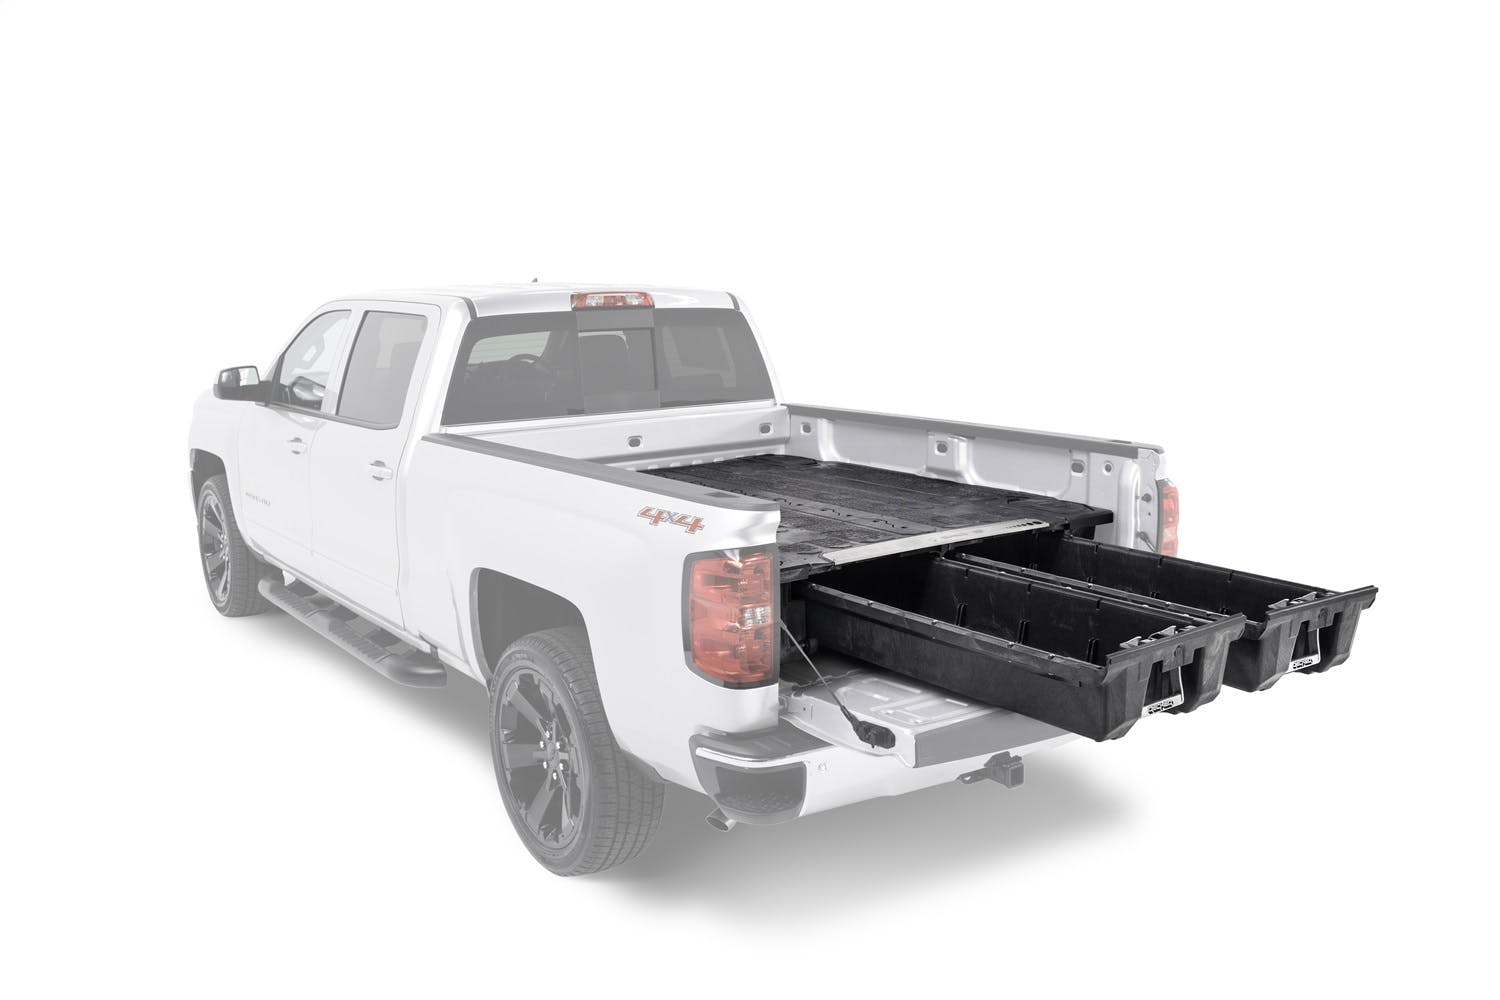 DECKED DG3 64.54 Two Drawer Storage System for A Full Size Pick Up Truck